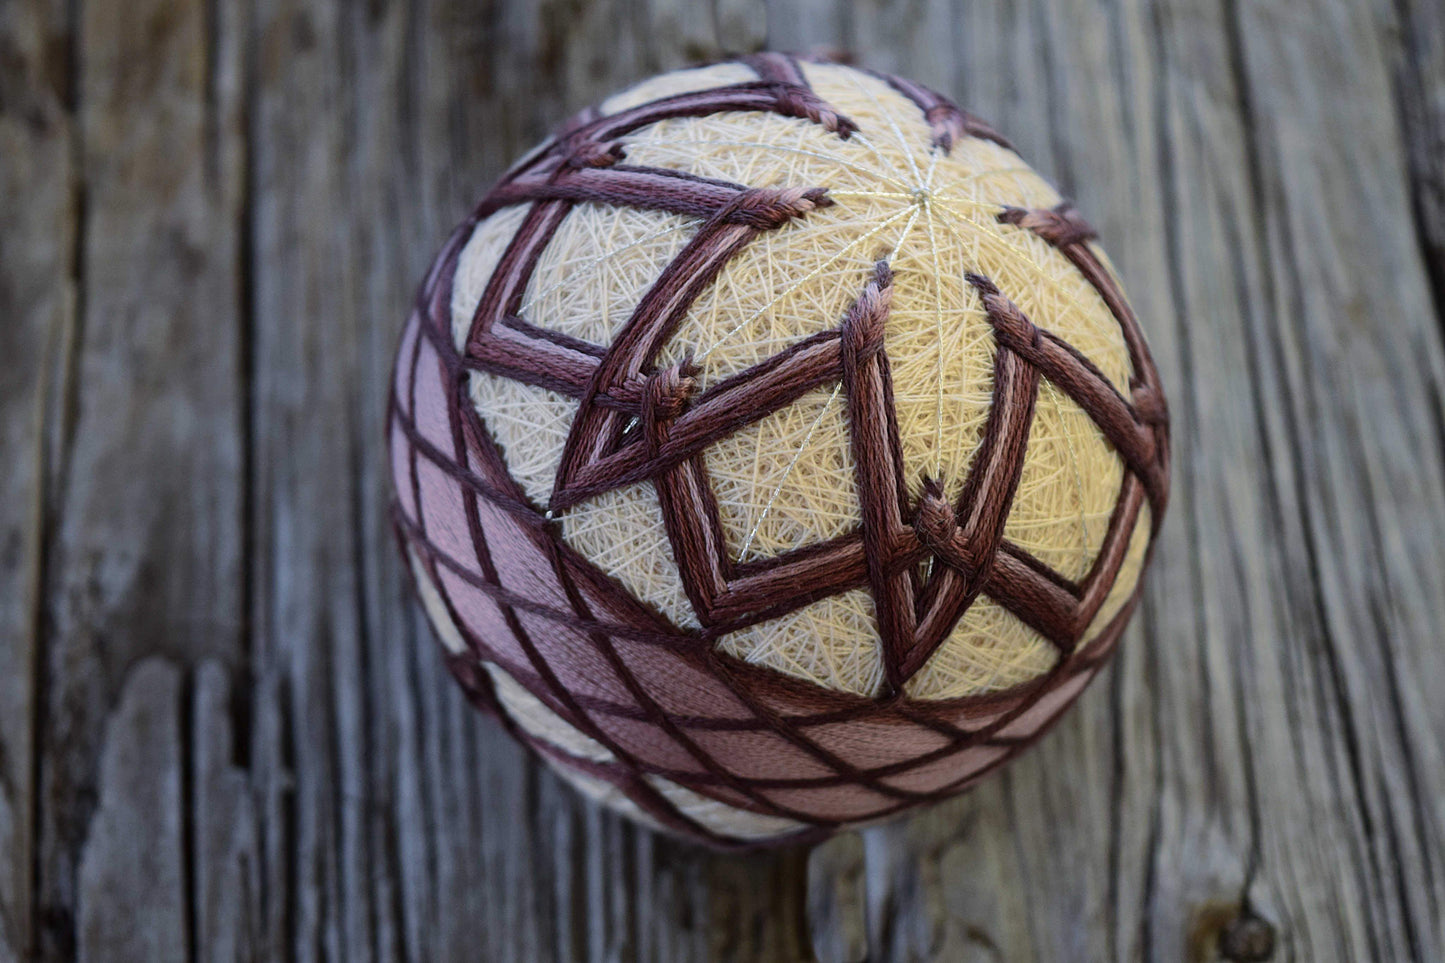 Temari ball embroidered with interlaced flower design